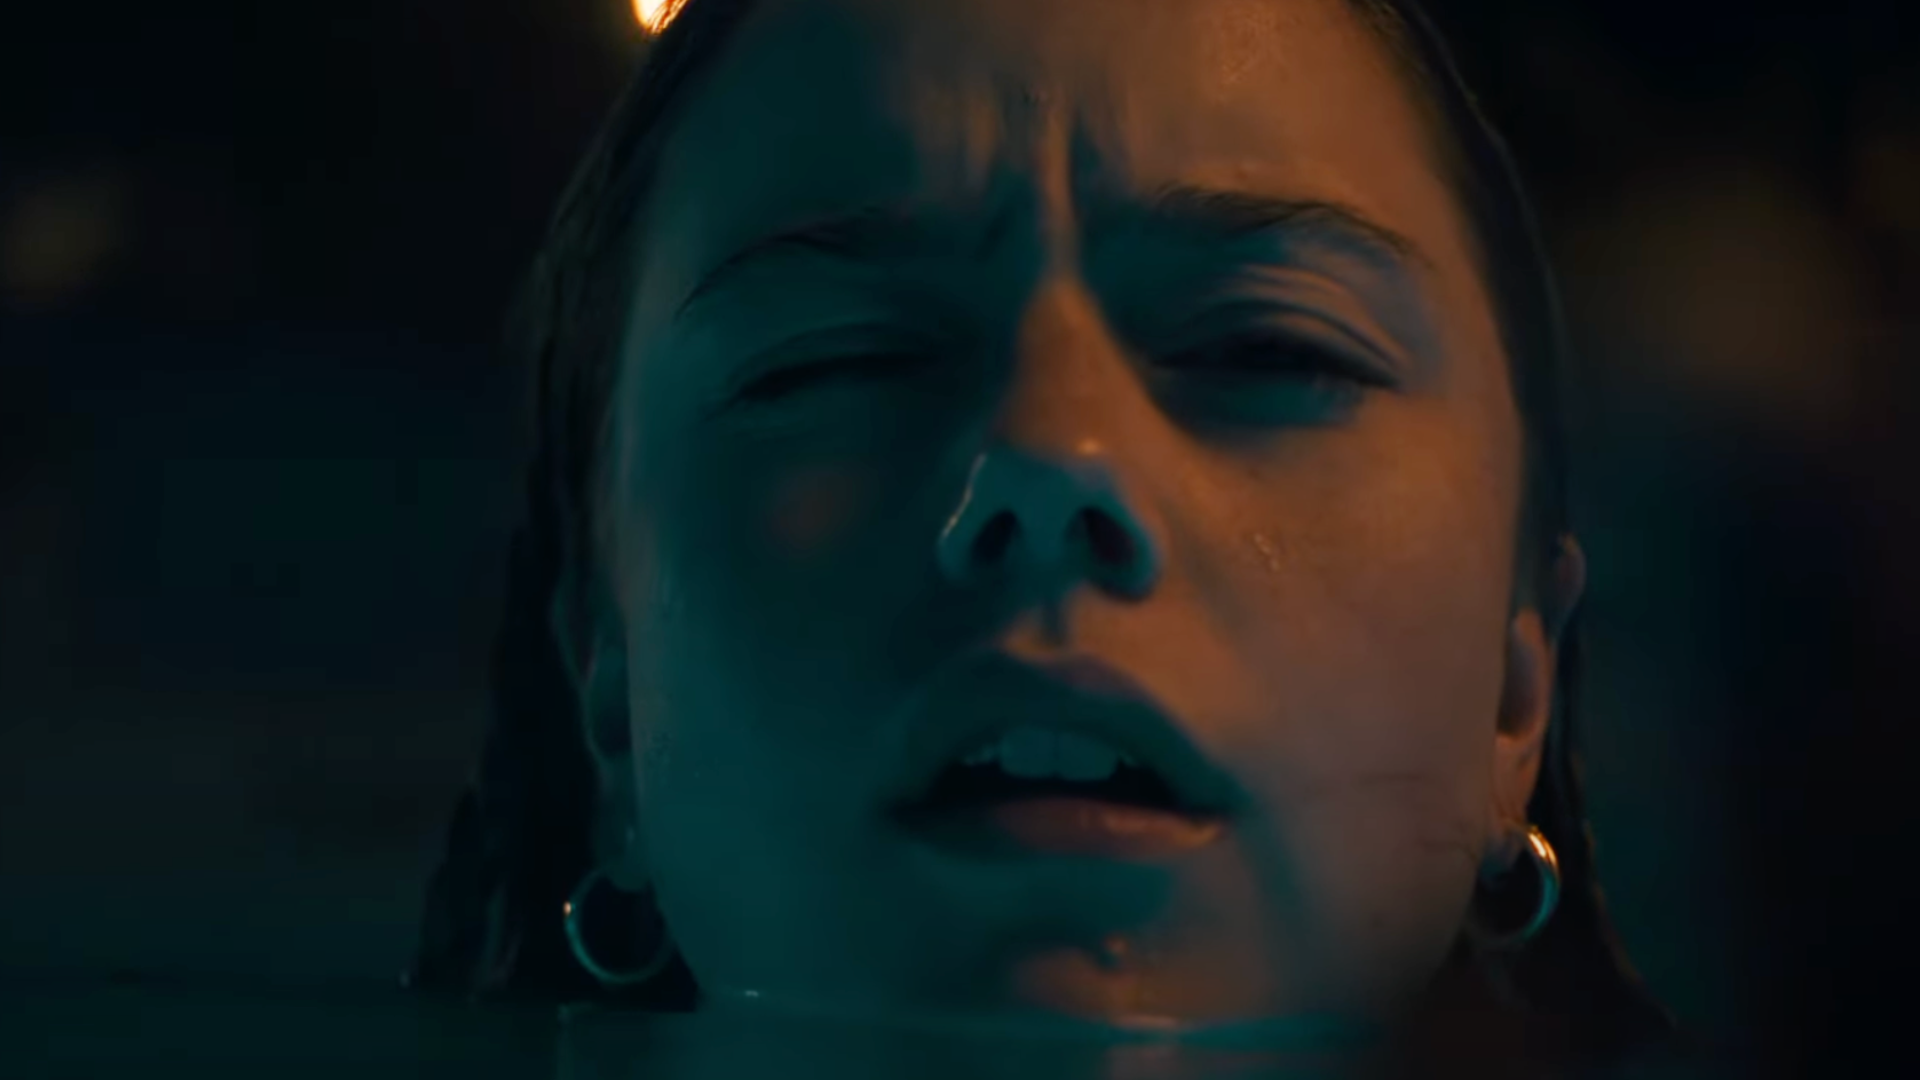 A New Trailer For 'Night Swim' Has Just Surfaced [Watch]